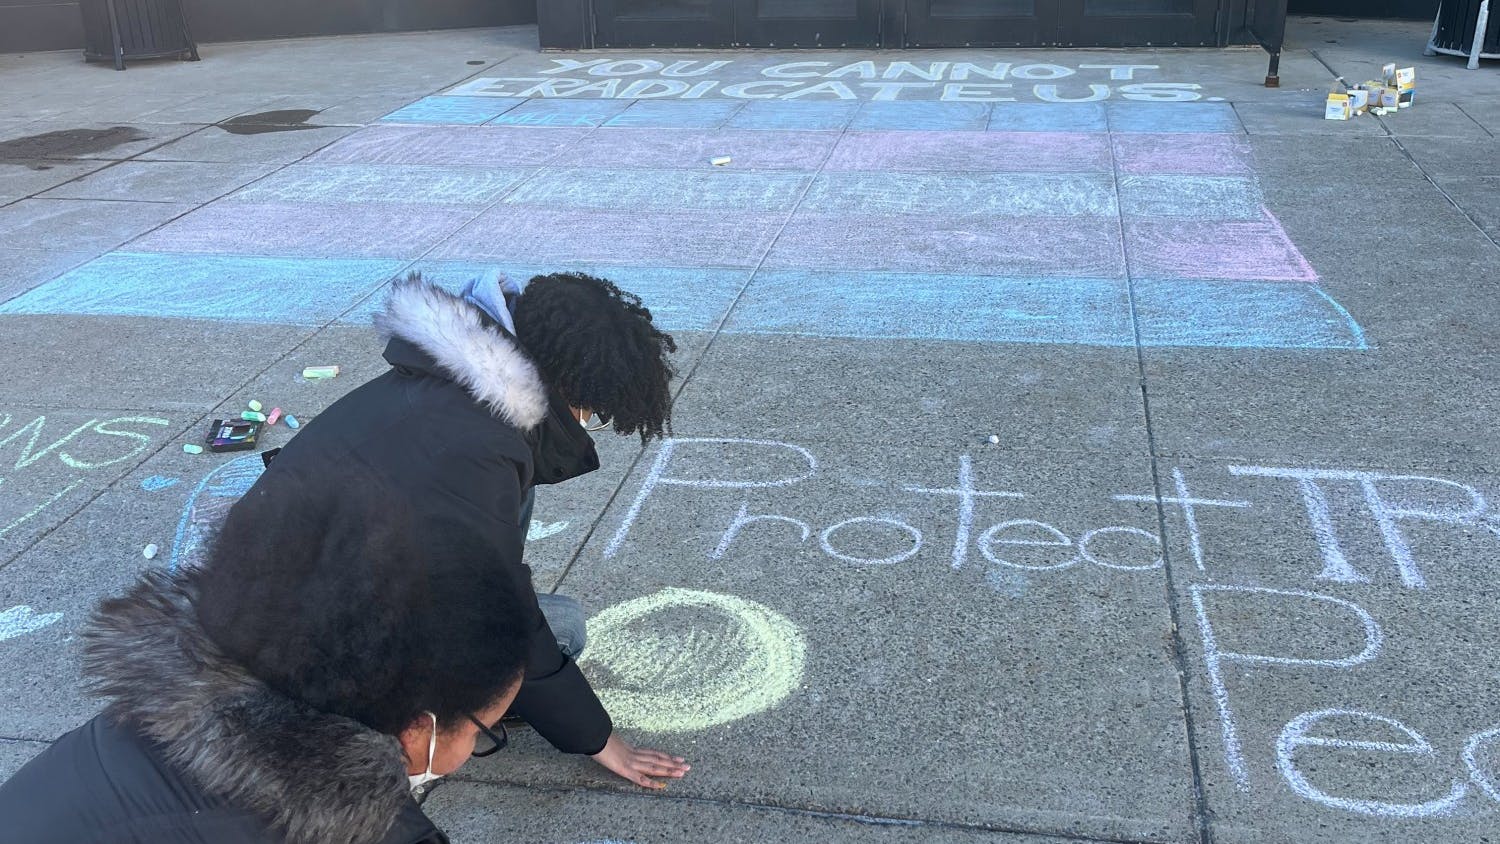 Students used screen-printing and sidewalk chalk to protest Knowles' speech outside of Slee Hall.&nbsp;